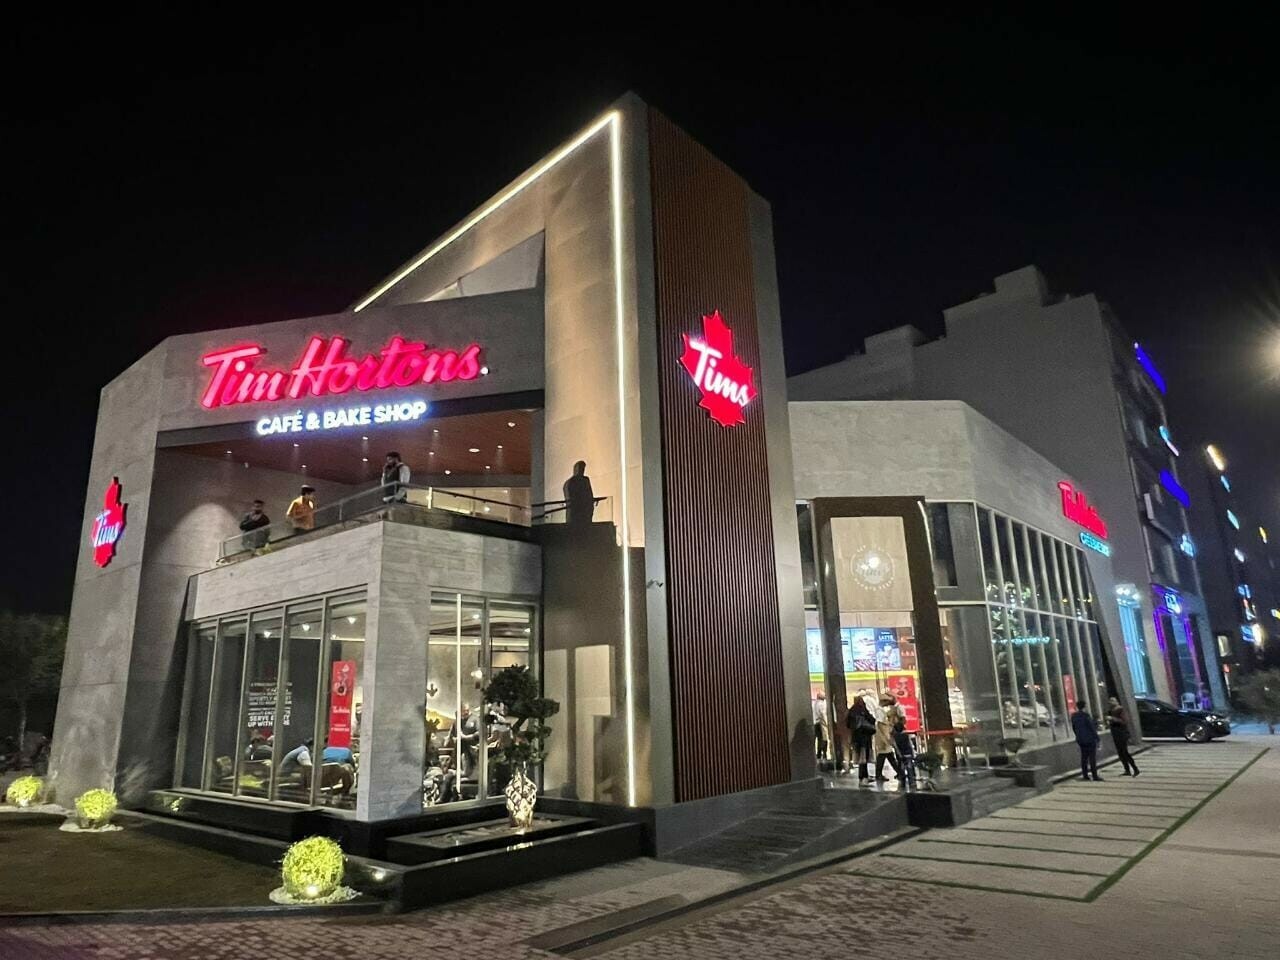 Tim Hortons comes to Pakistan - The Food Experts